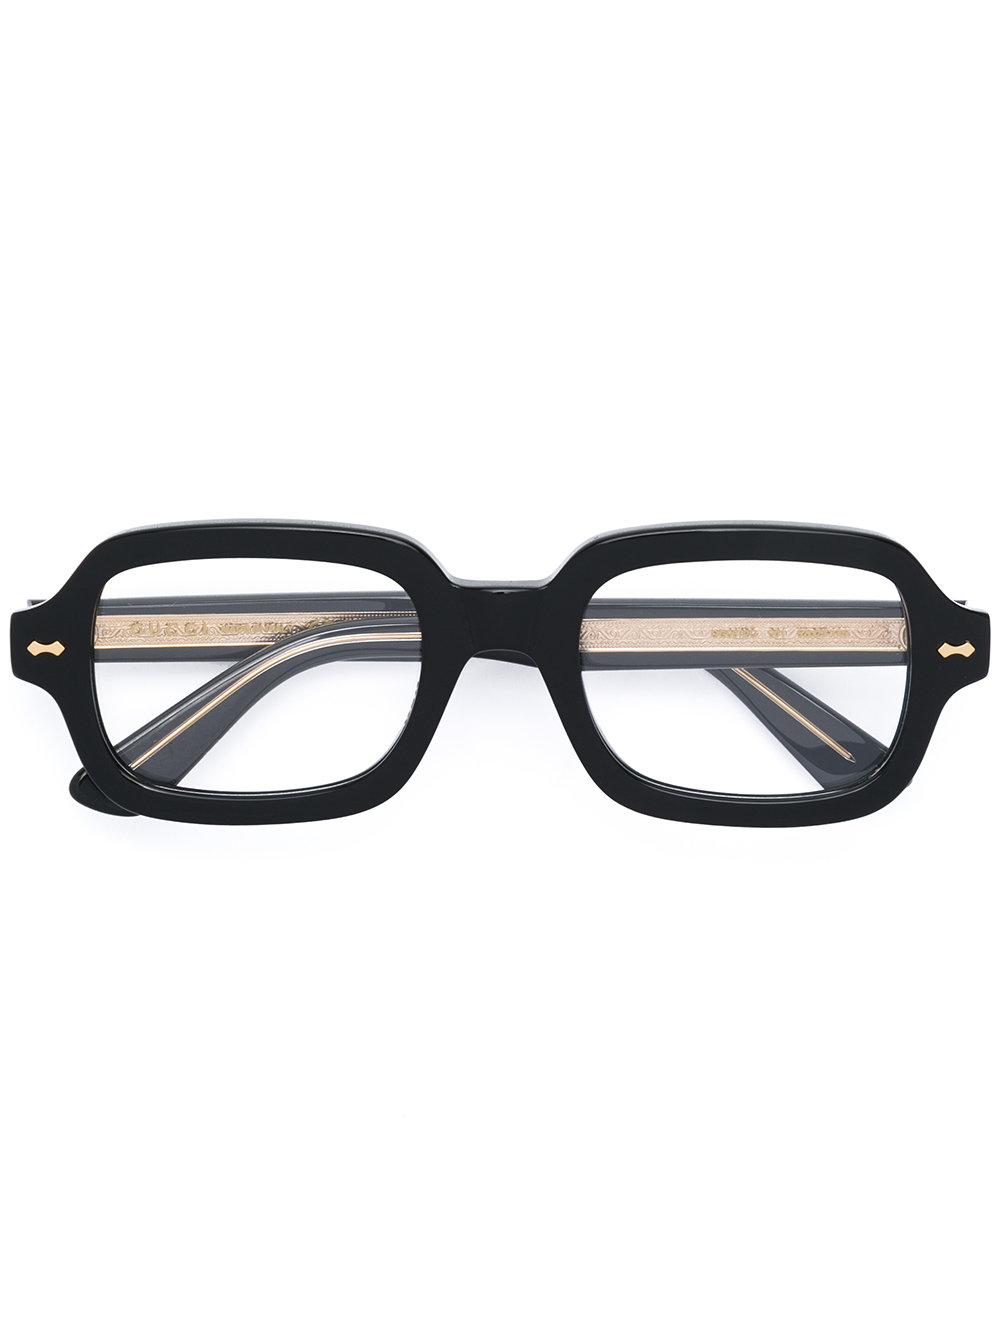 Gucci Thick Rimmed Glasses in Black | Lyst